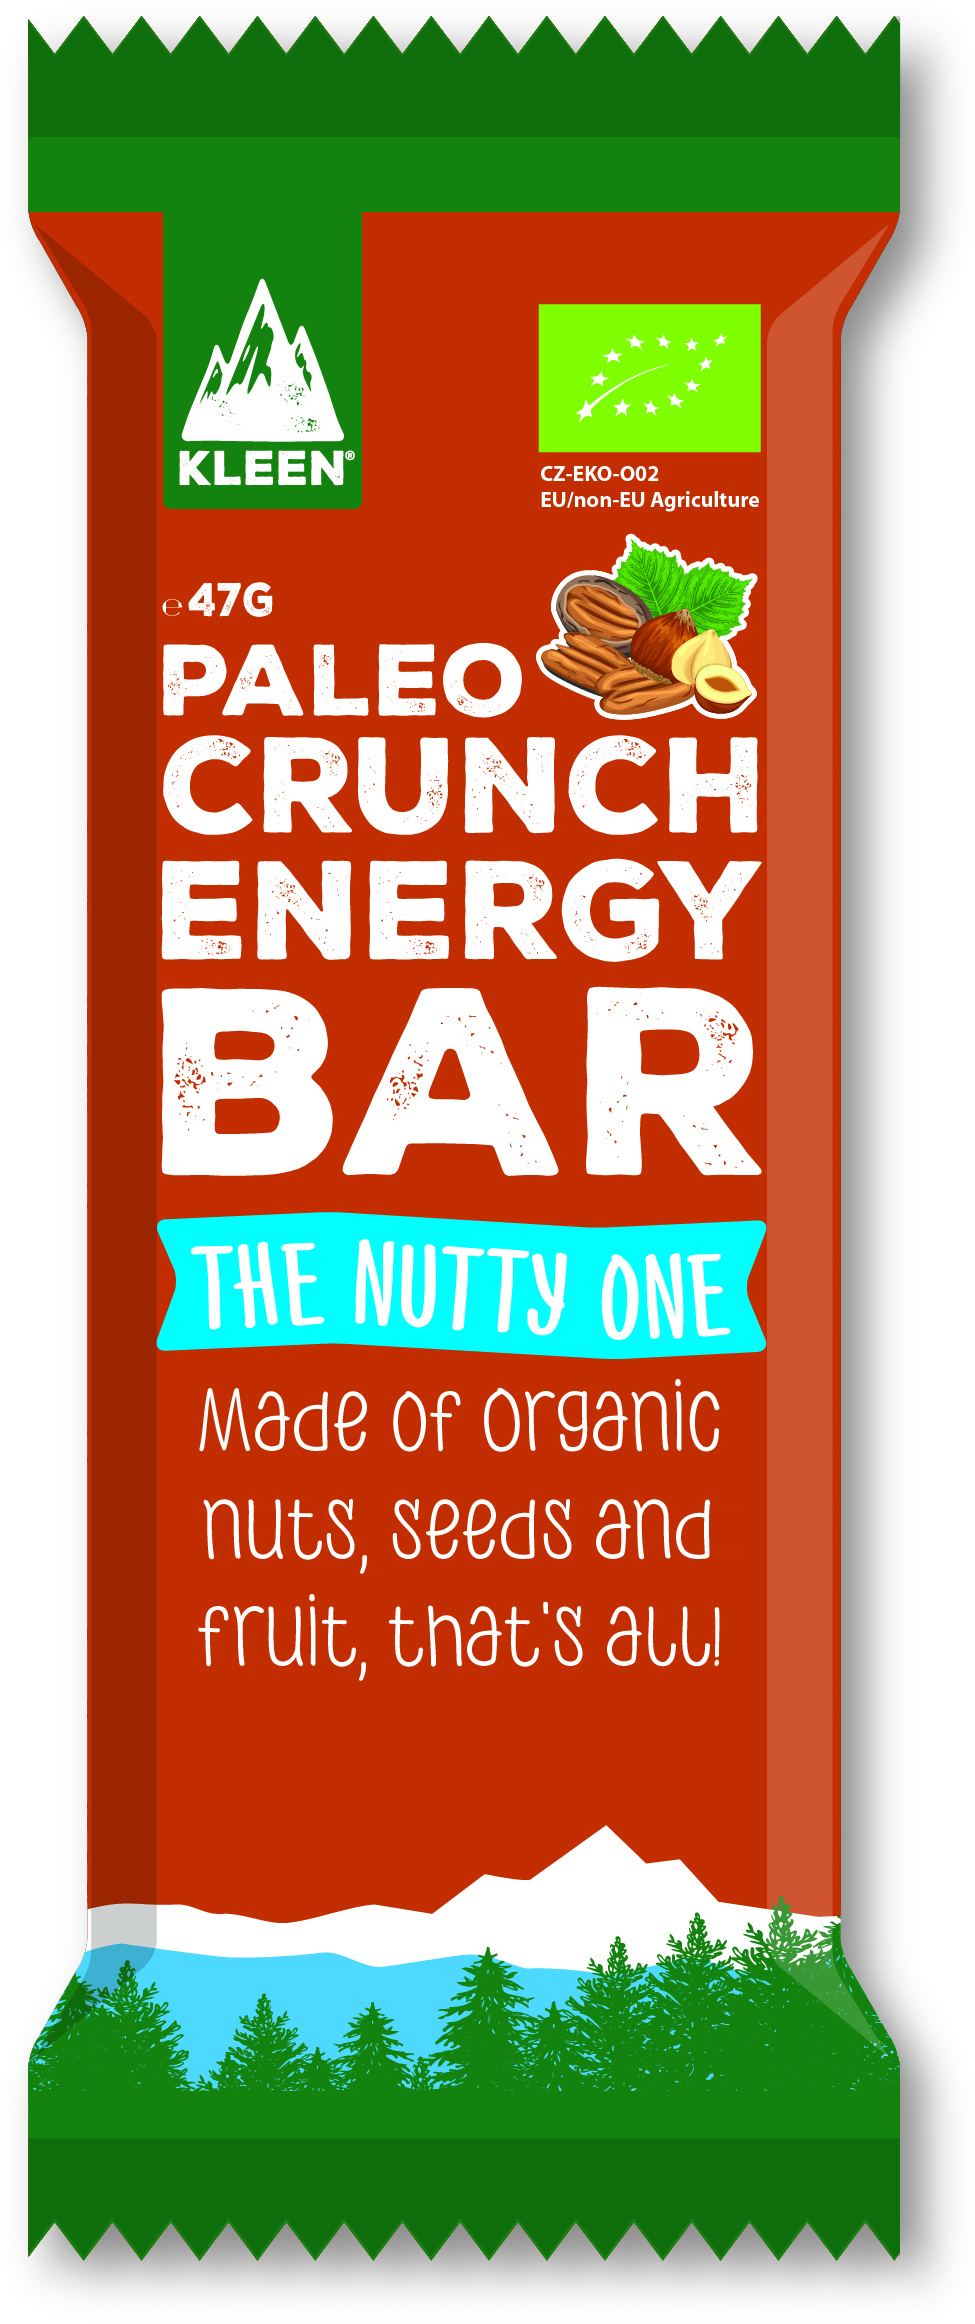 Kleen Sports Nutrition Kleen Paleo Crunch Energy Bar The Nutty One 47g